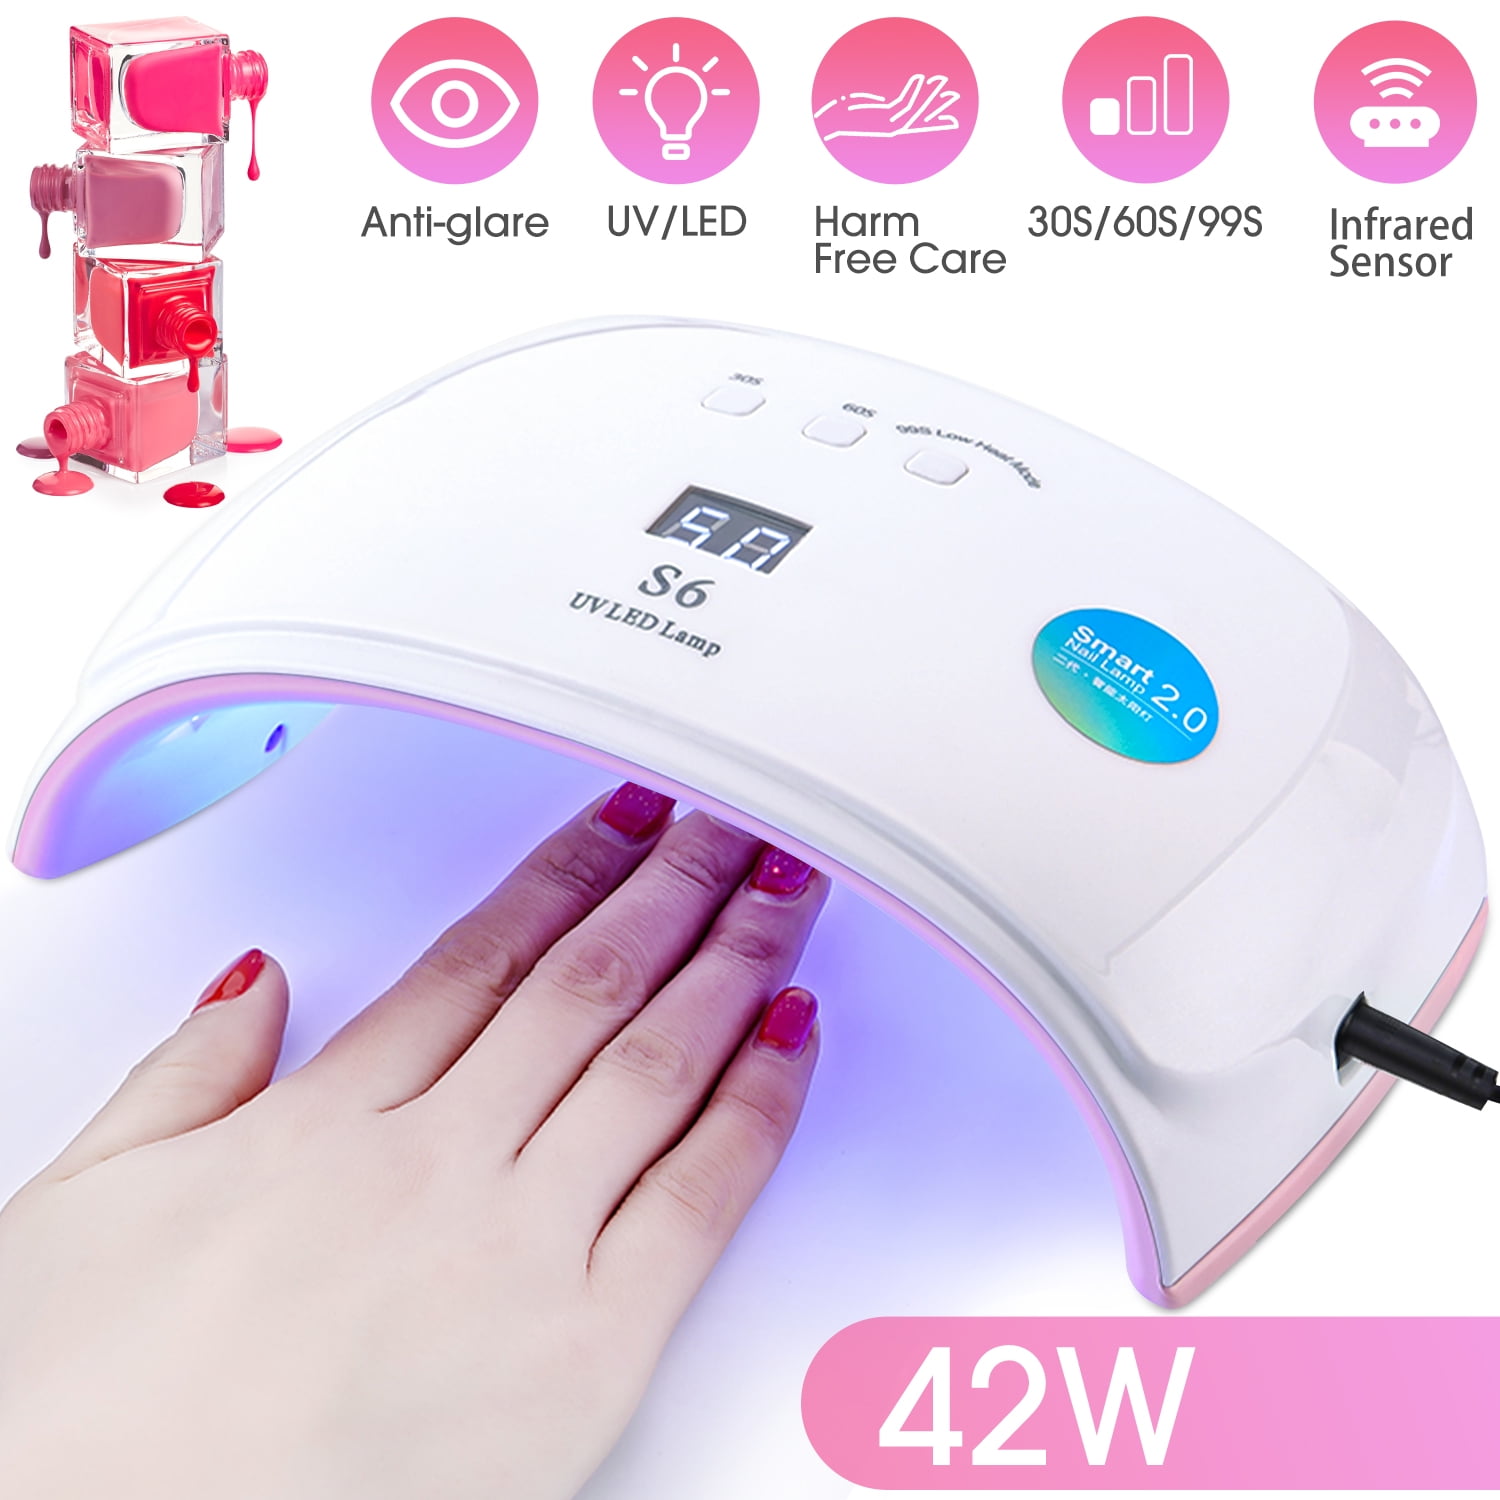 sacudir Napier Crueldad UV LED Nail Lamp, 42W Nail Dryer Gel Nail Light for Nail Polish, Light  Curing in 3 Modes for Time, for Manicure Pedicure Nail Art at Home -  Walmart.com